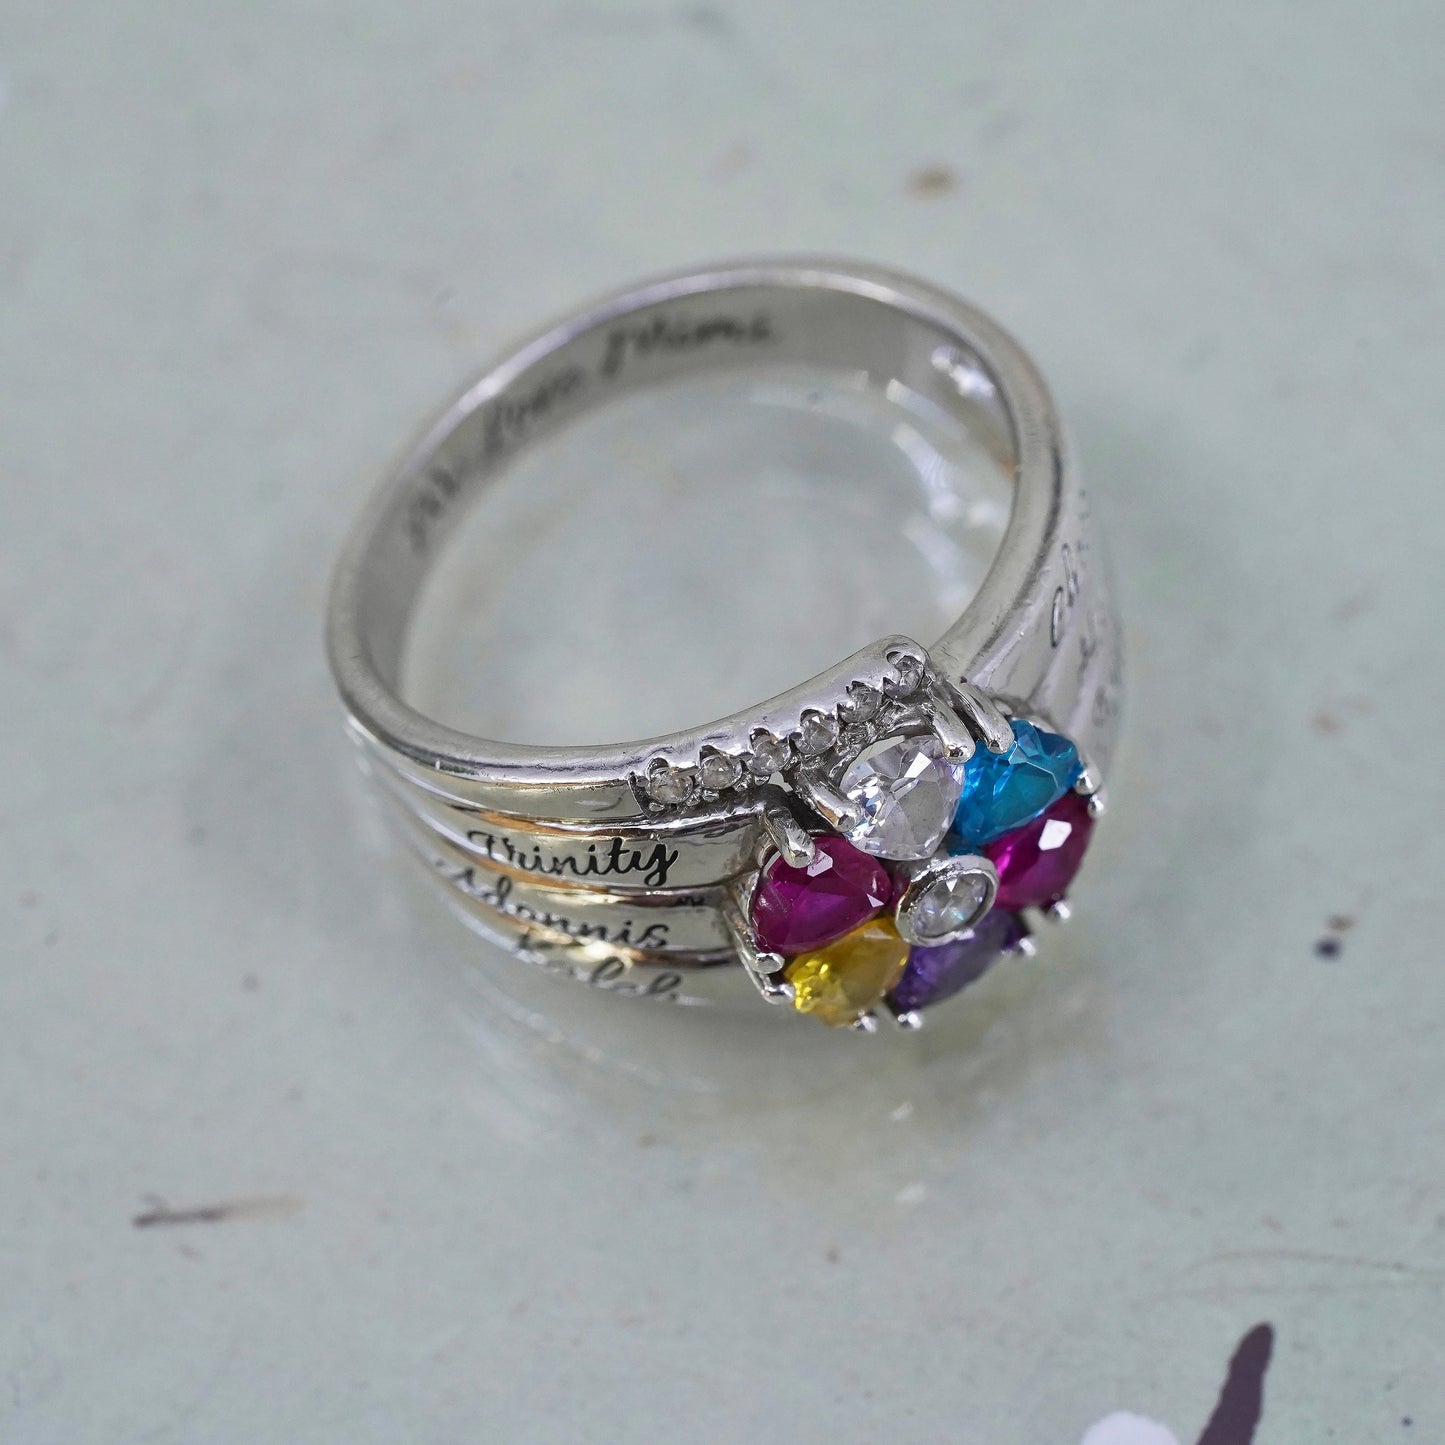 Size 9, sterling silver 925 ring with topaz citrine citrine ruby and amethyst